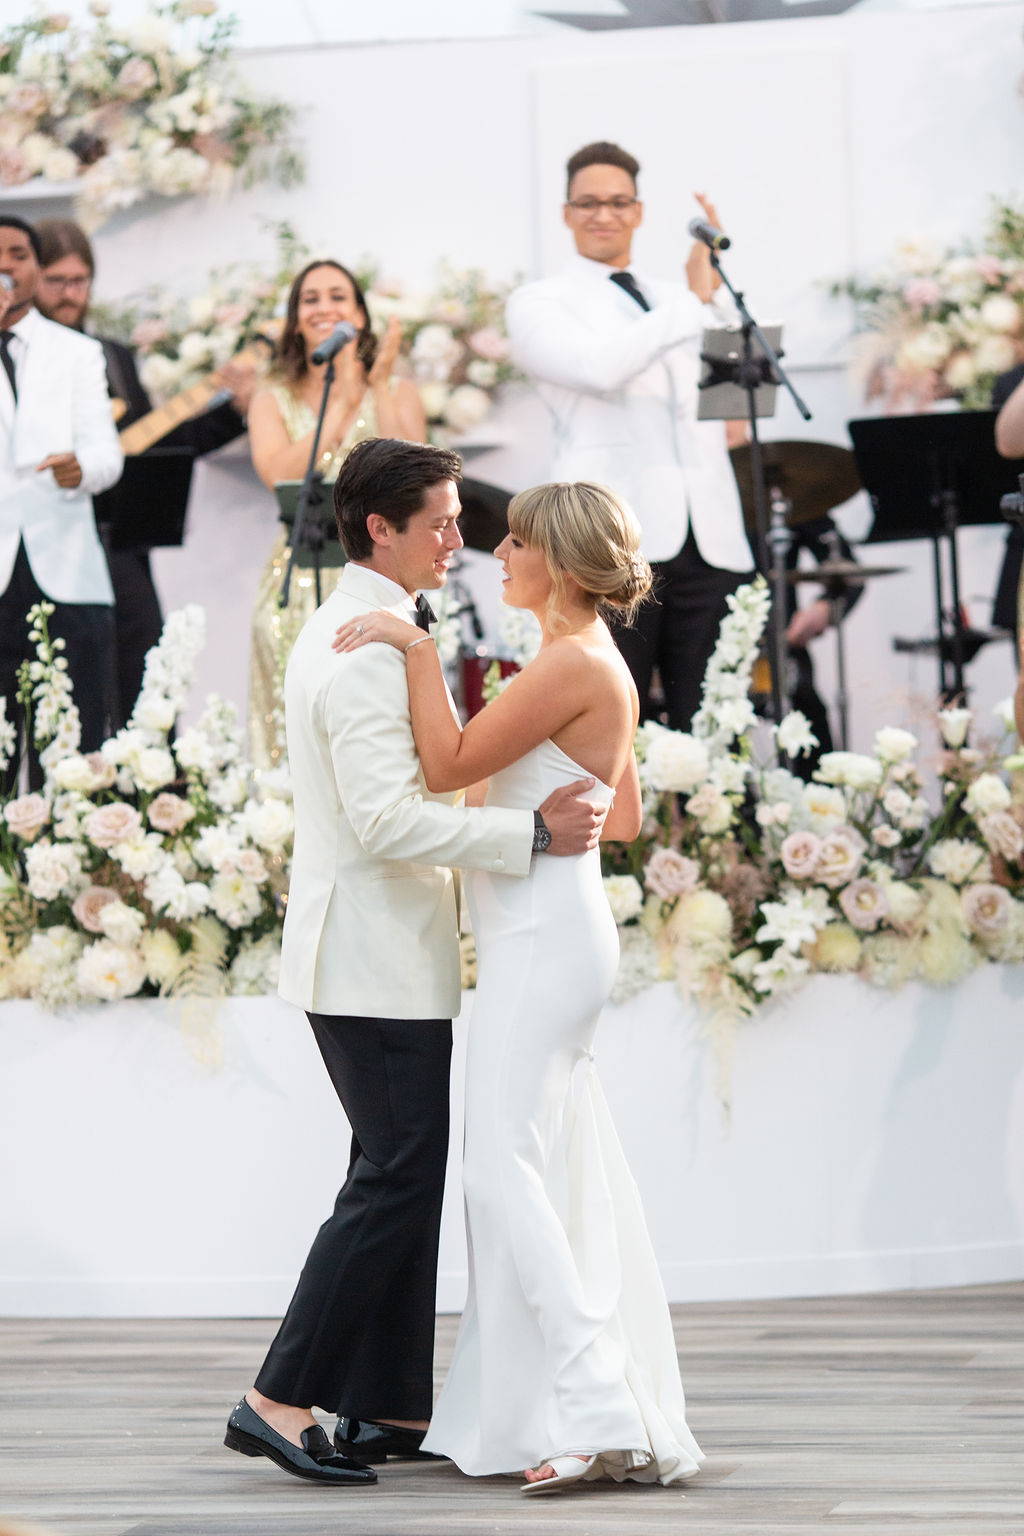 Newlyweds dancing in front of floral covered stage